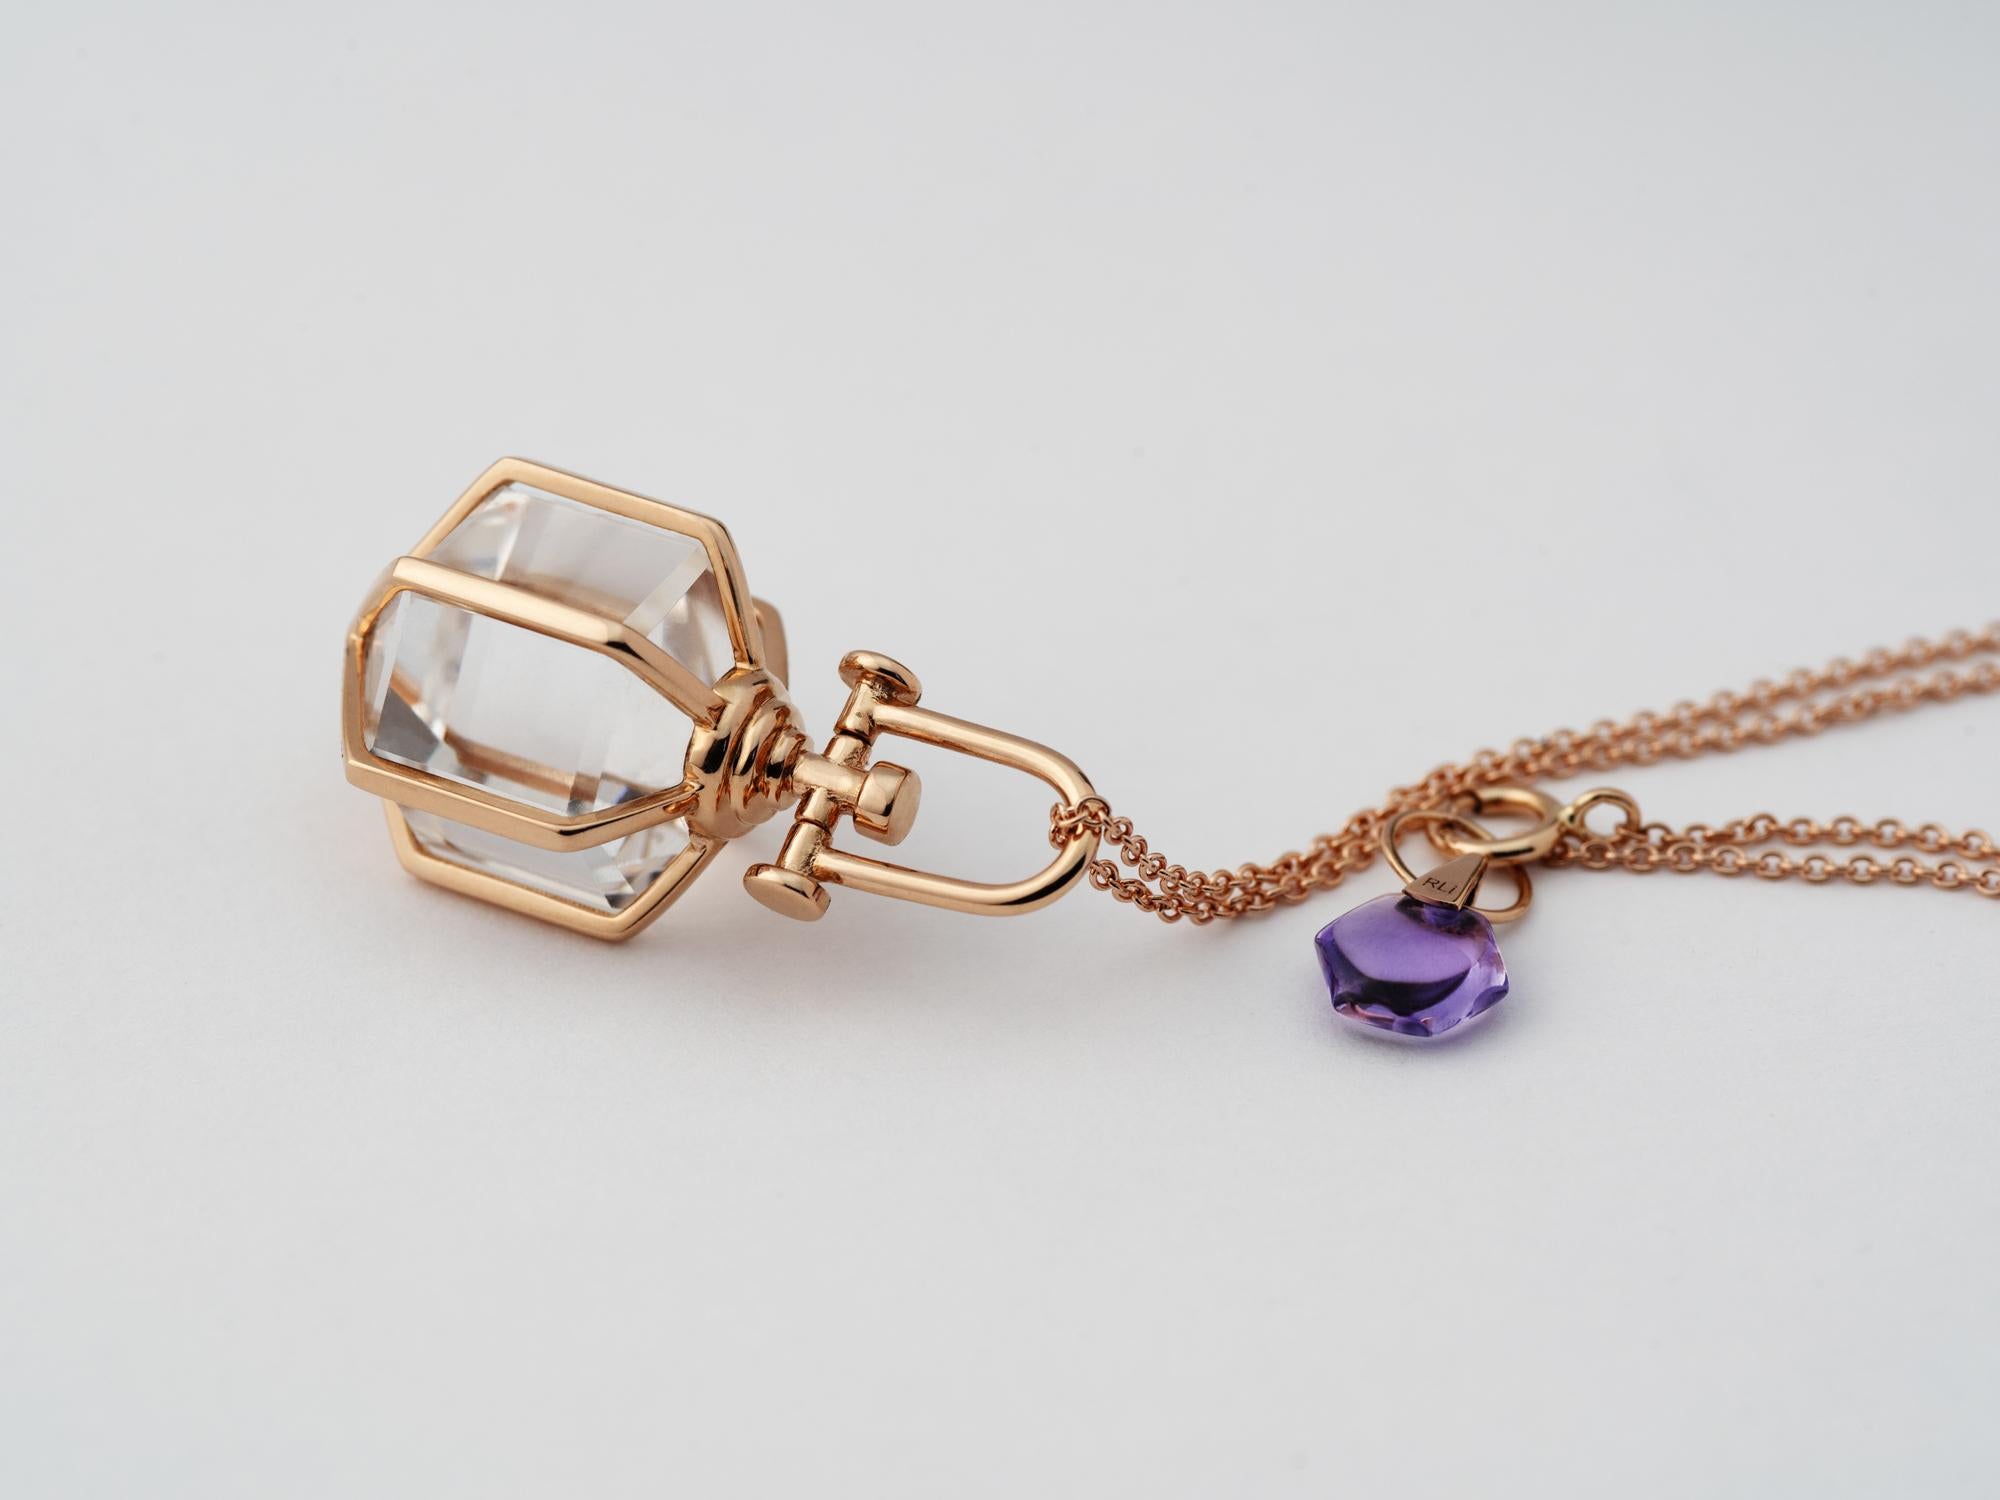 Rebecca Li designs Mindfulness. 
This necklace is from her Six Senses Talisman Collection. It's inspired by sacred geometry. The designer wants us to always remember that we have the ability to control uncontrollable by simply control what we can,